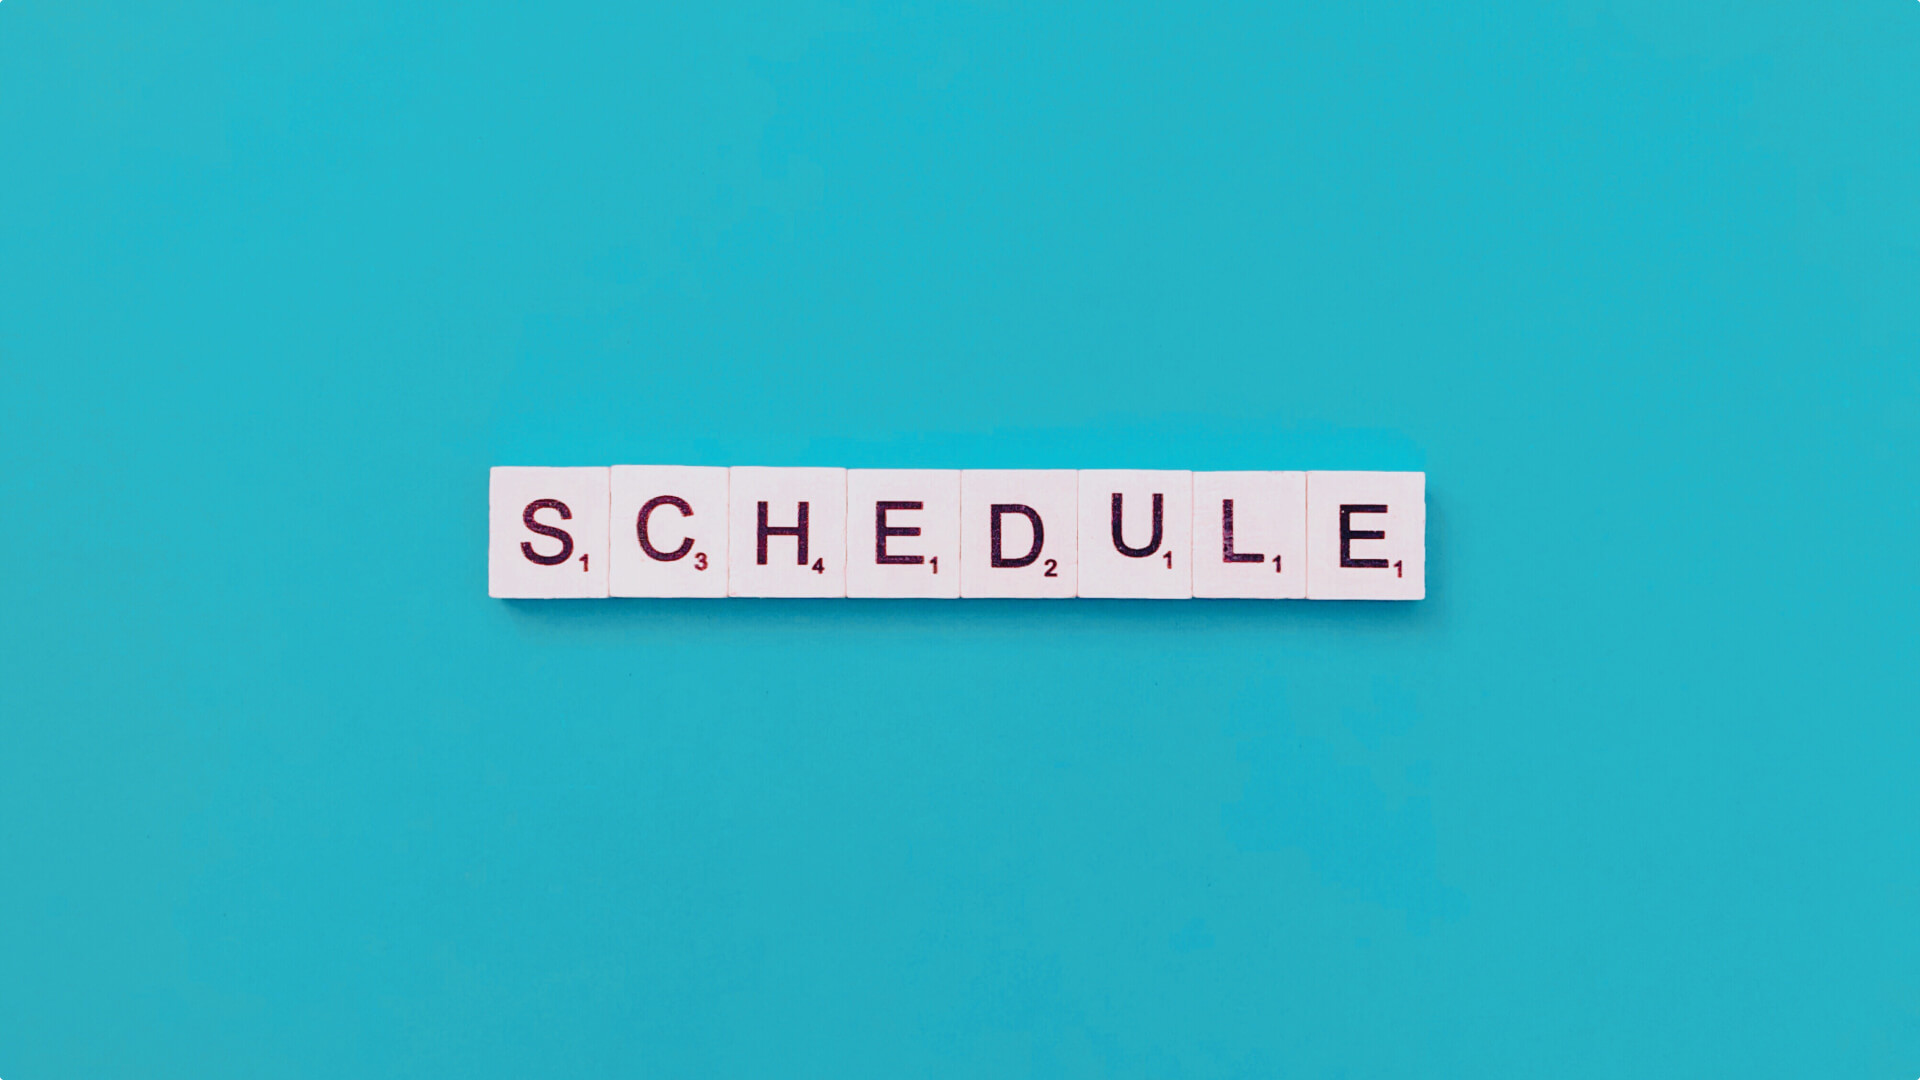 The word 'SCHEDULE' spelled out with letter tiles against a blue background.